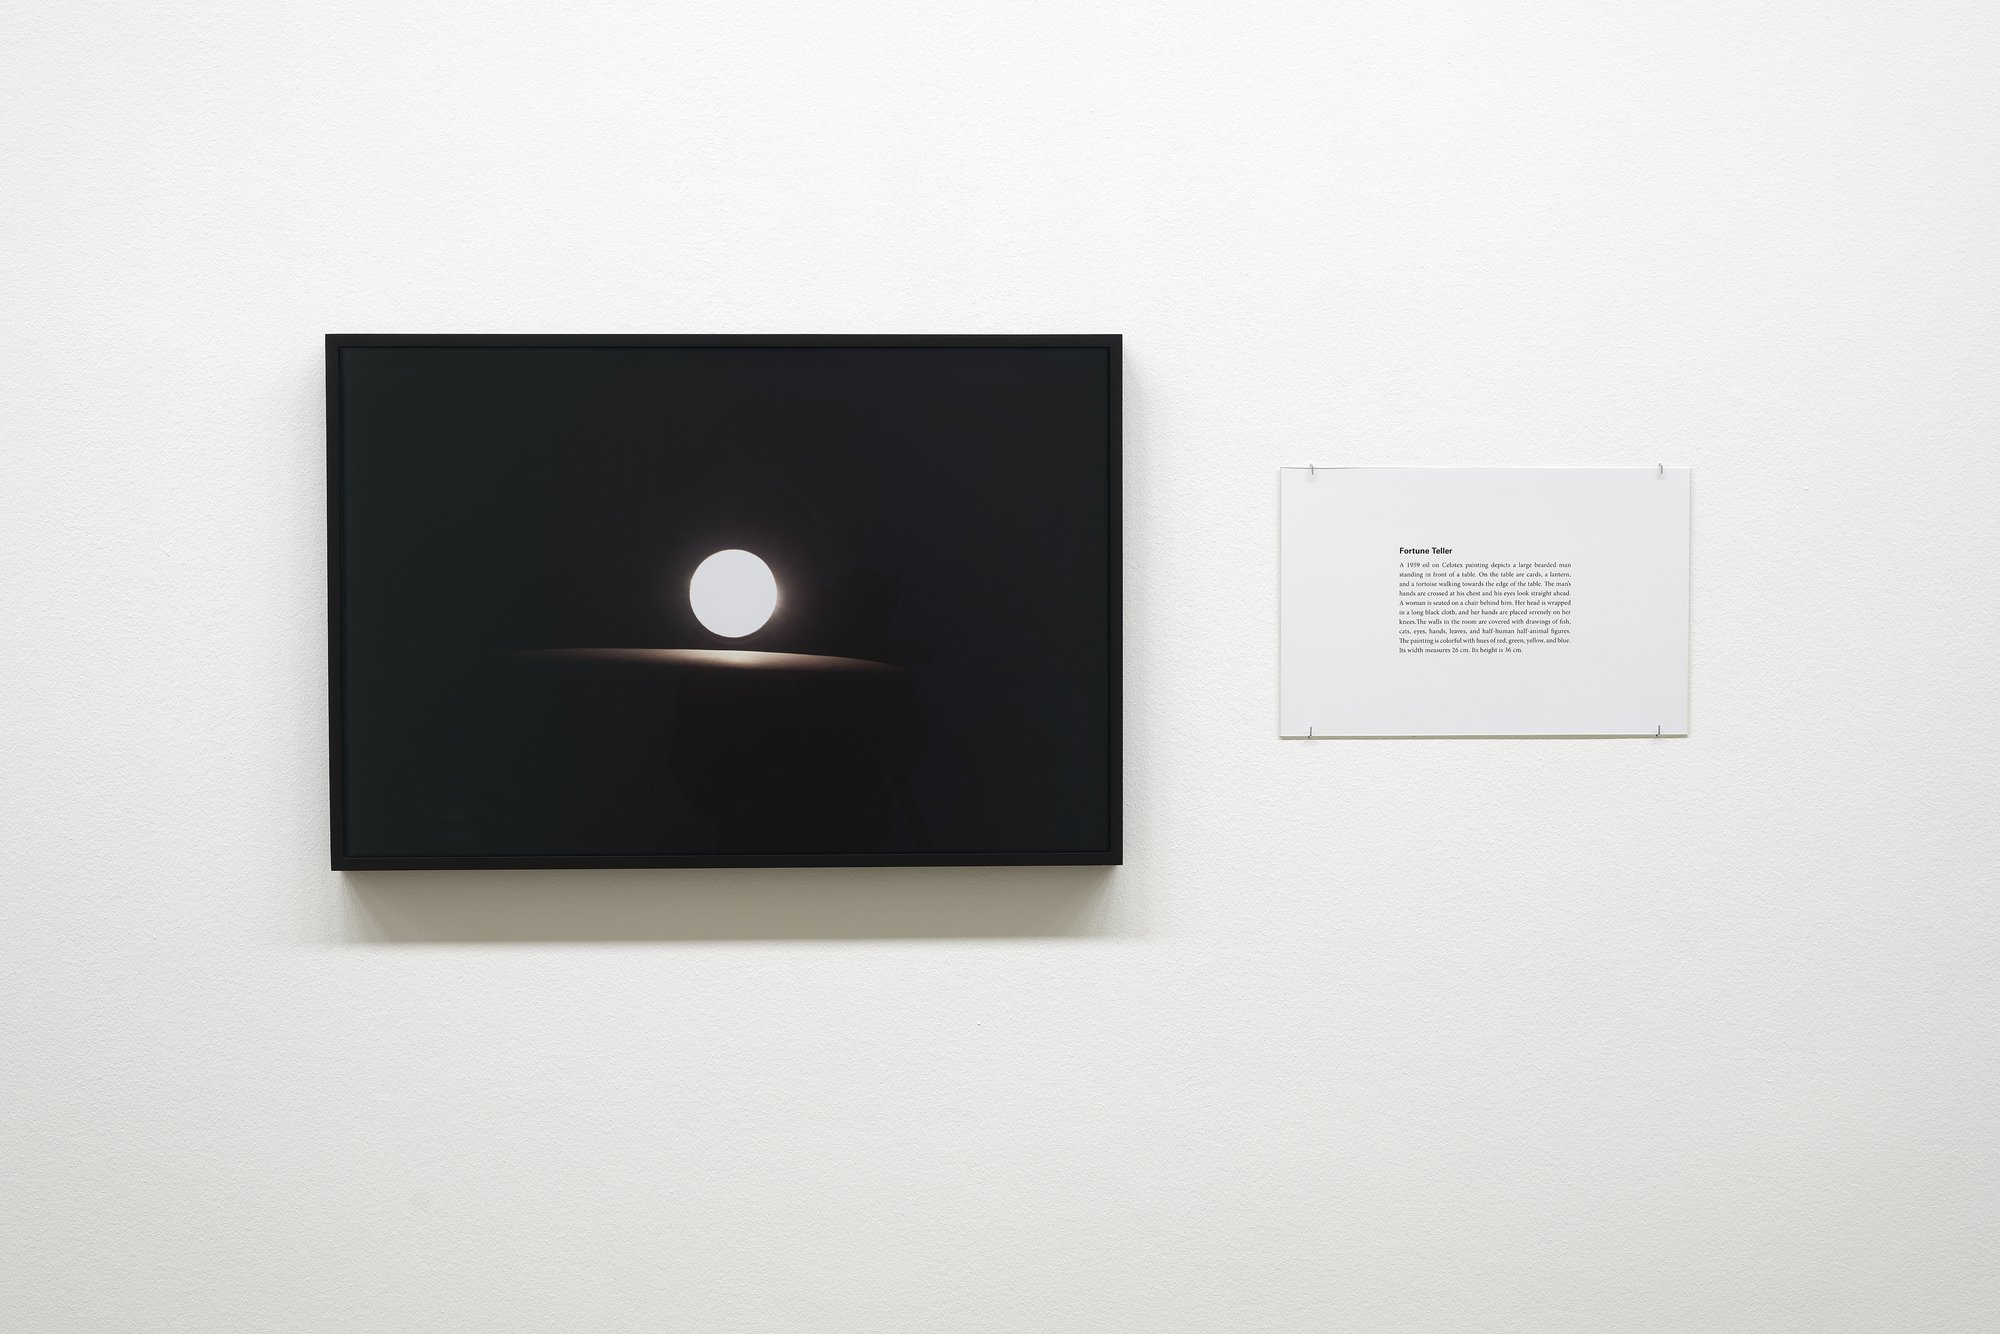 Iman Issa, Fortune Teller (study for 2013), C-print, framed, text panel under glass, 54.3 x 80.7 cm, 2013. Installation view, Proxies, with a Life of Their Own, Taxispalais Kunsthalle Tirol, Innsbruck